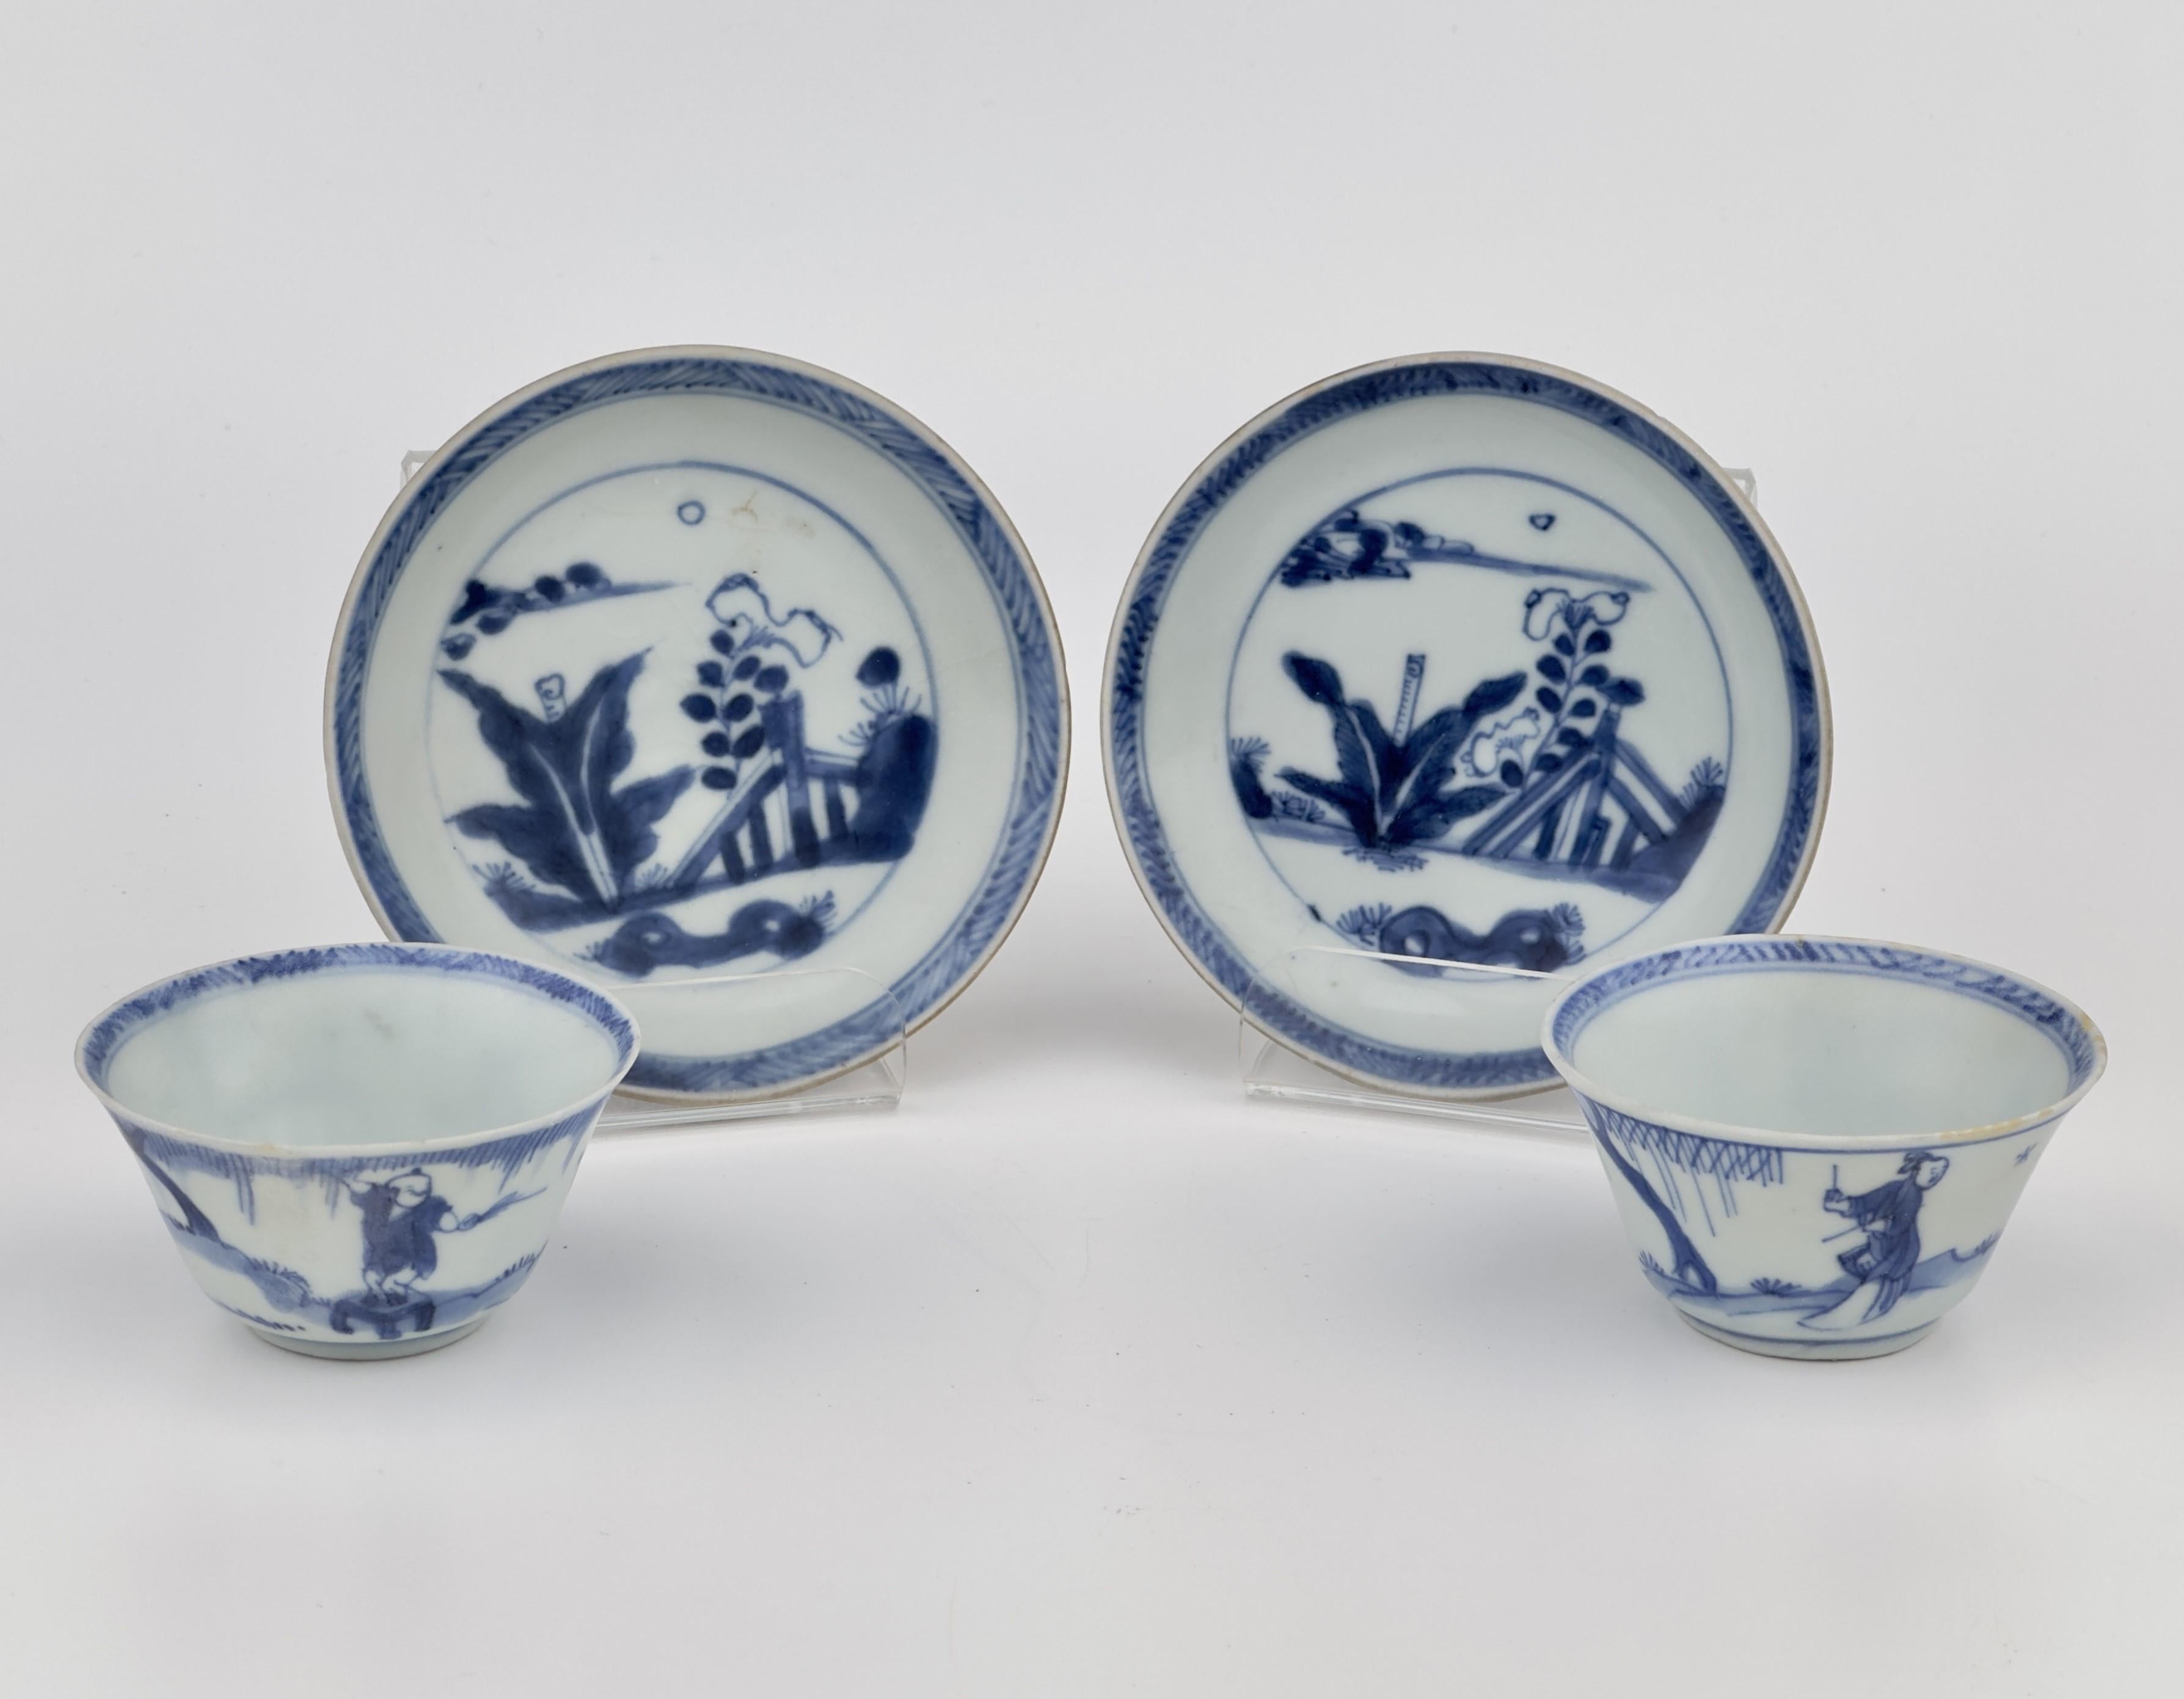 Chinese Export Blue and White Tea Set c 1725, Qing Dynasty, Yongzheng Reign For Sale